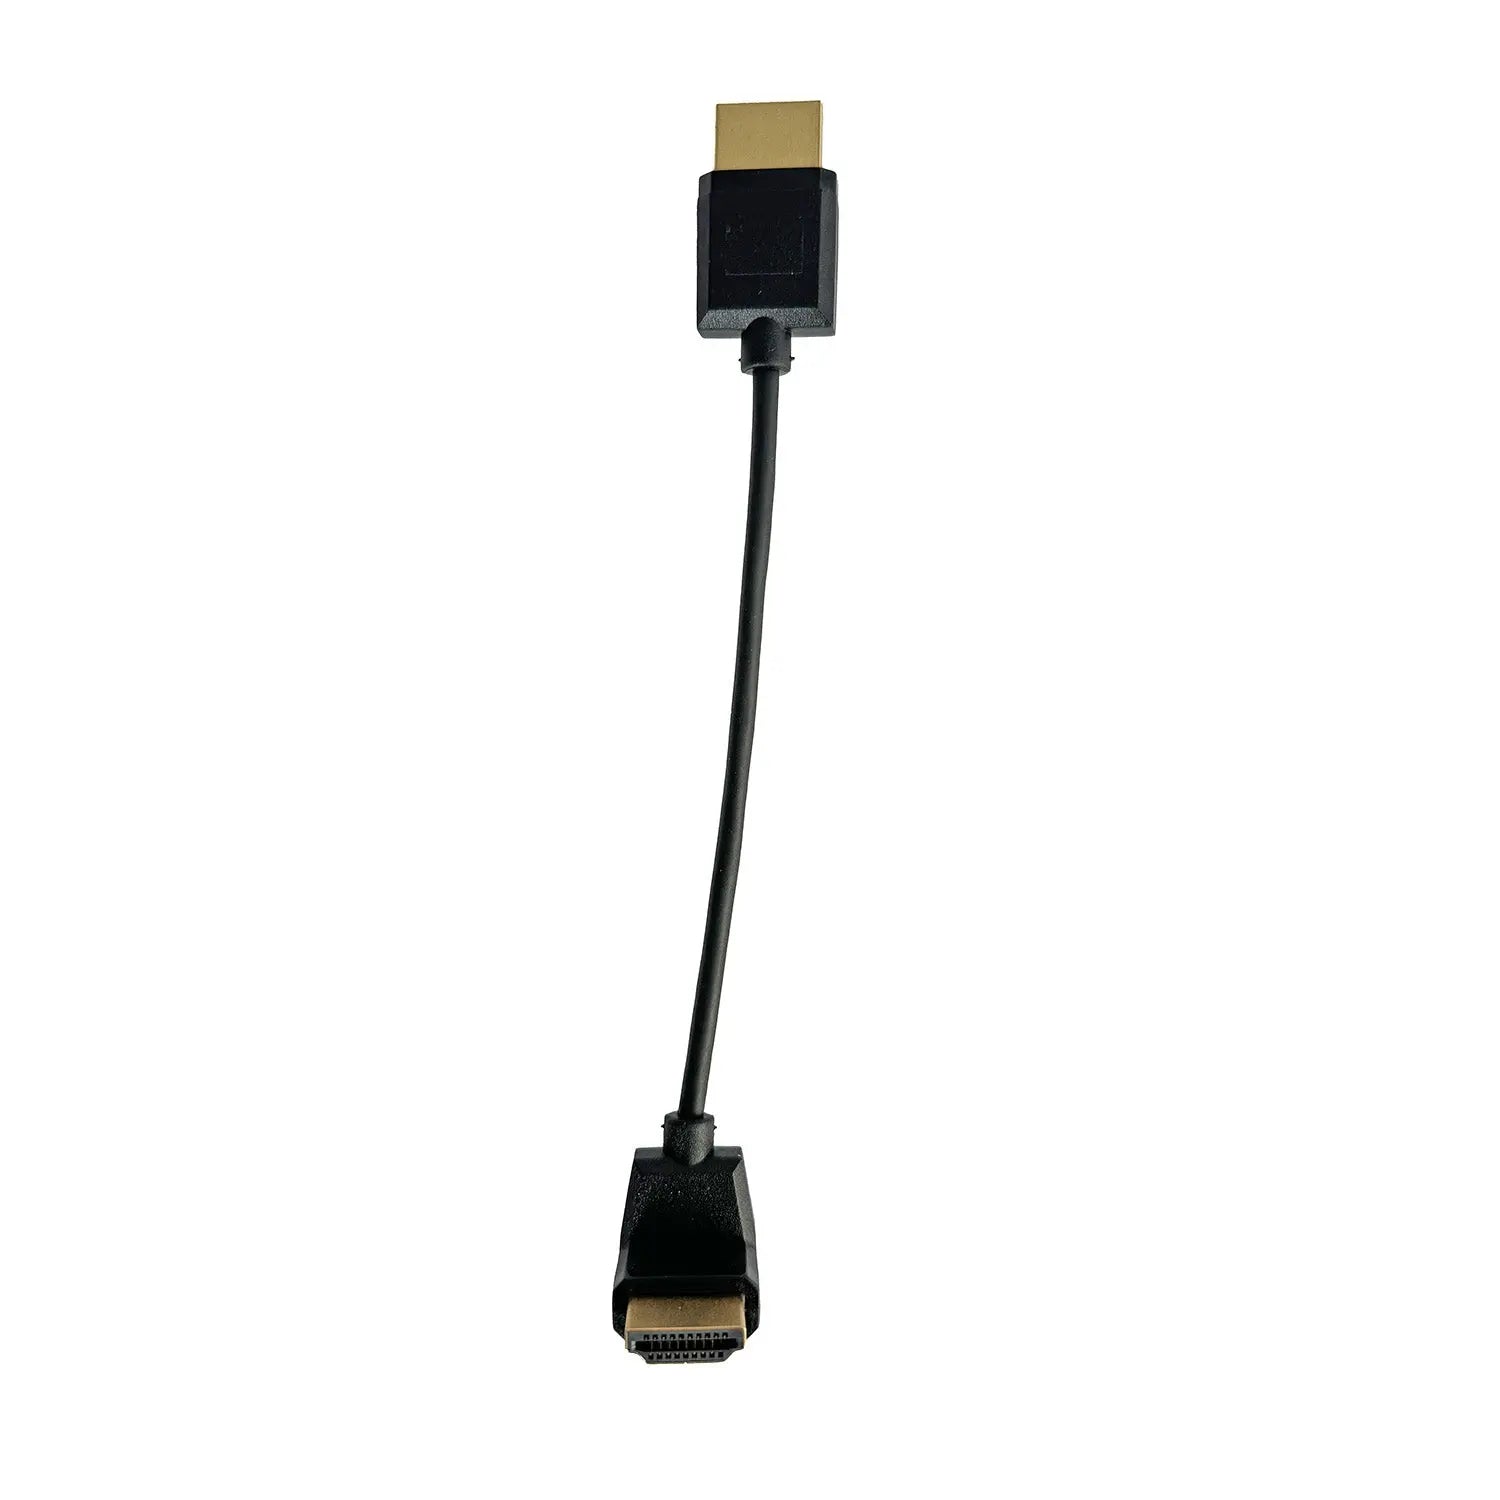 EMBER "PERFECT" HDMI CABLE Product vendor